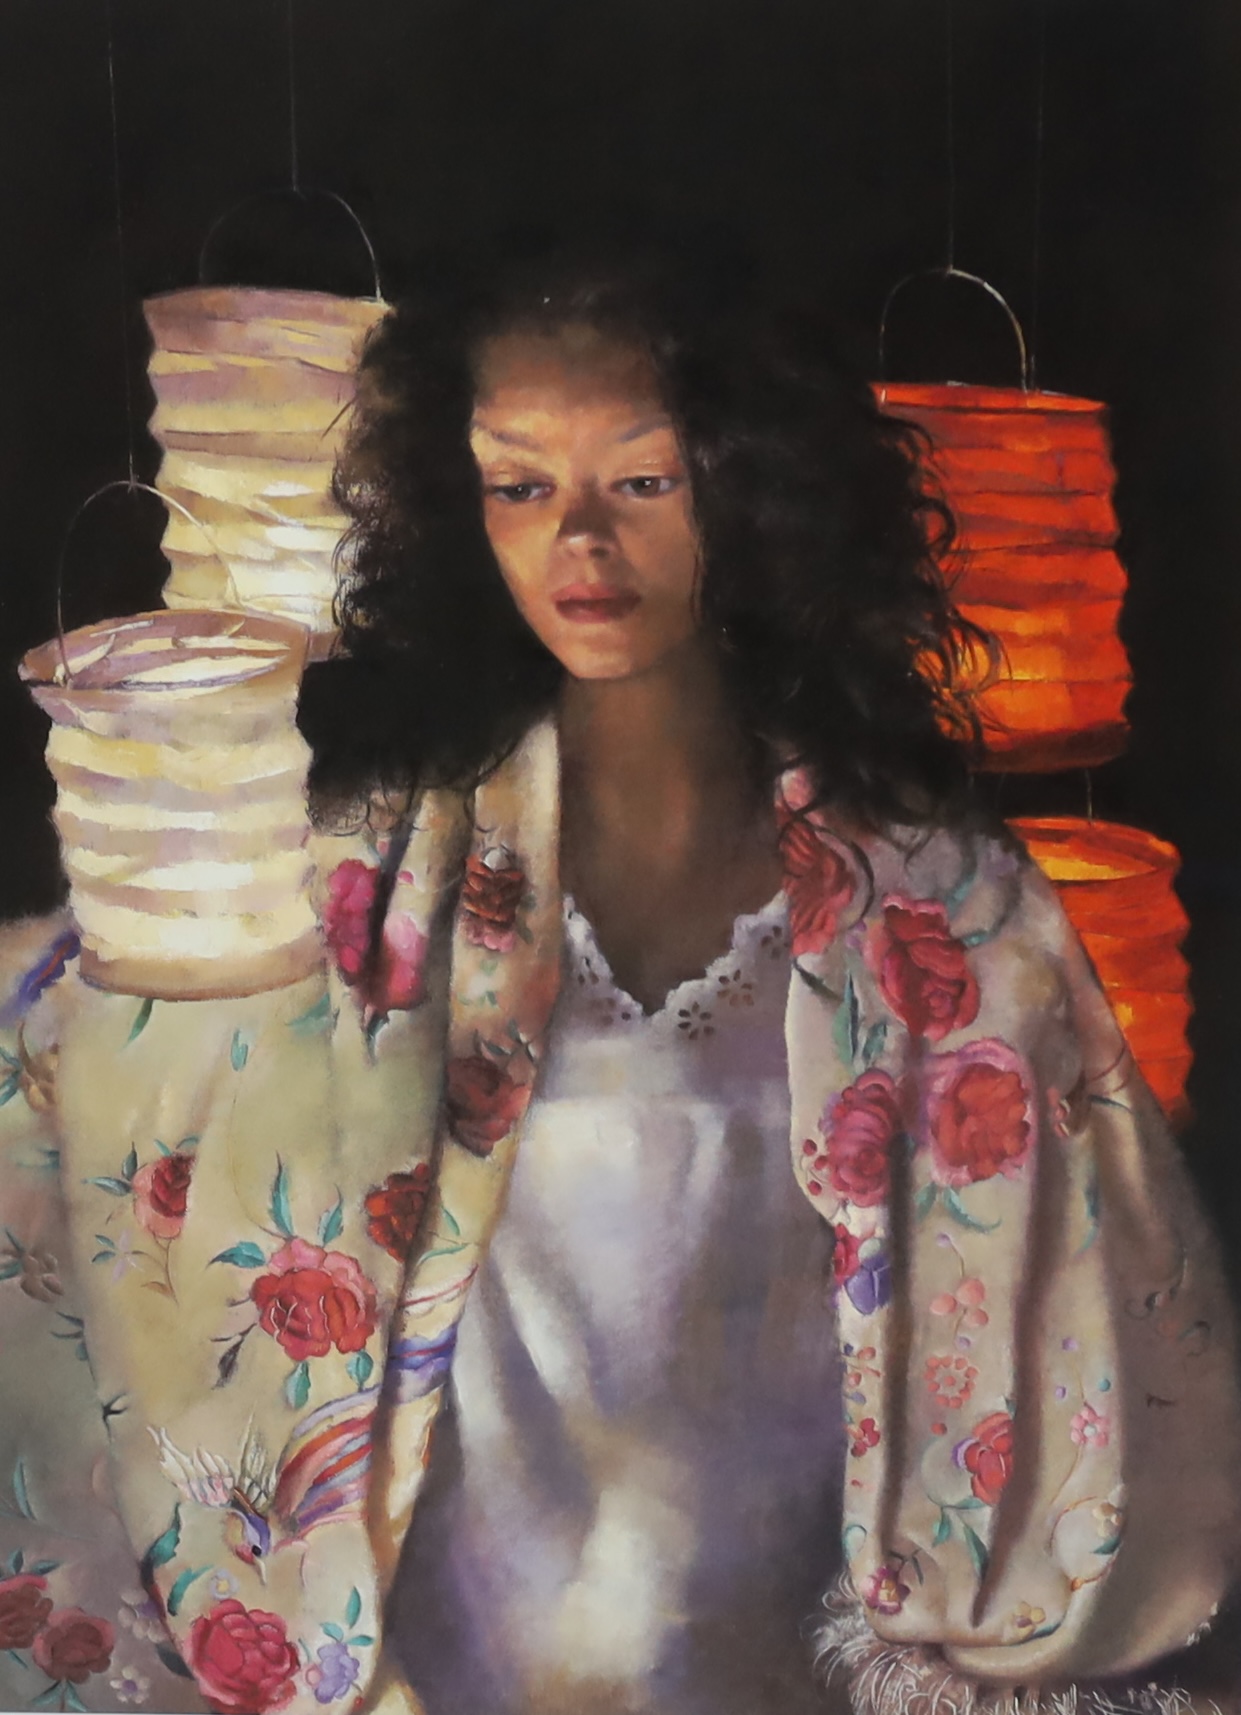 Robert Lenkiewicz (1941-2002), offset lithograph, 'Anna with paper lanterns' signed in pencil and titled, 9/500, 52 x 36cm. Condition - good